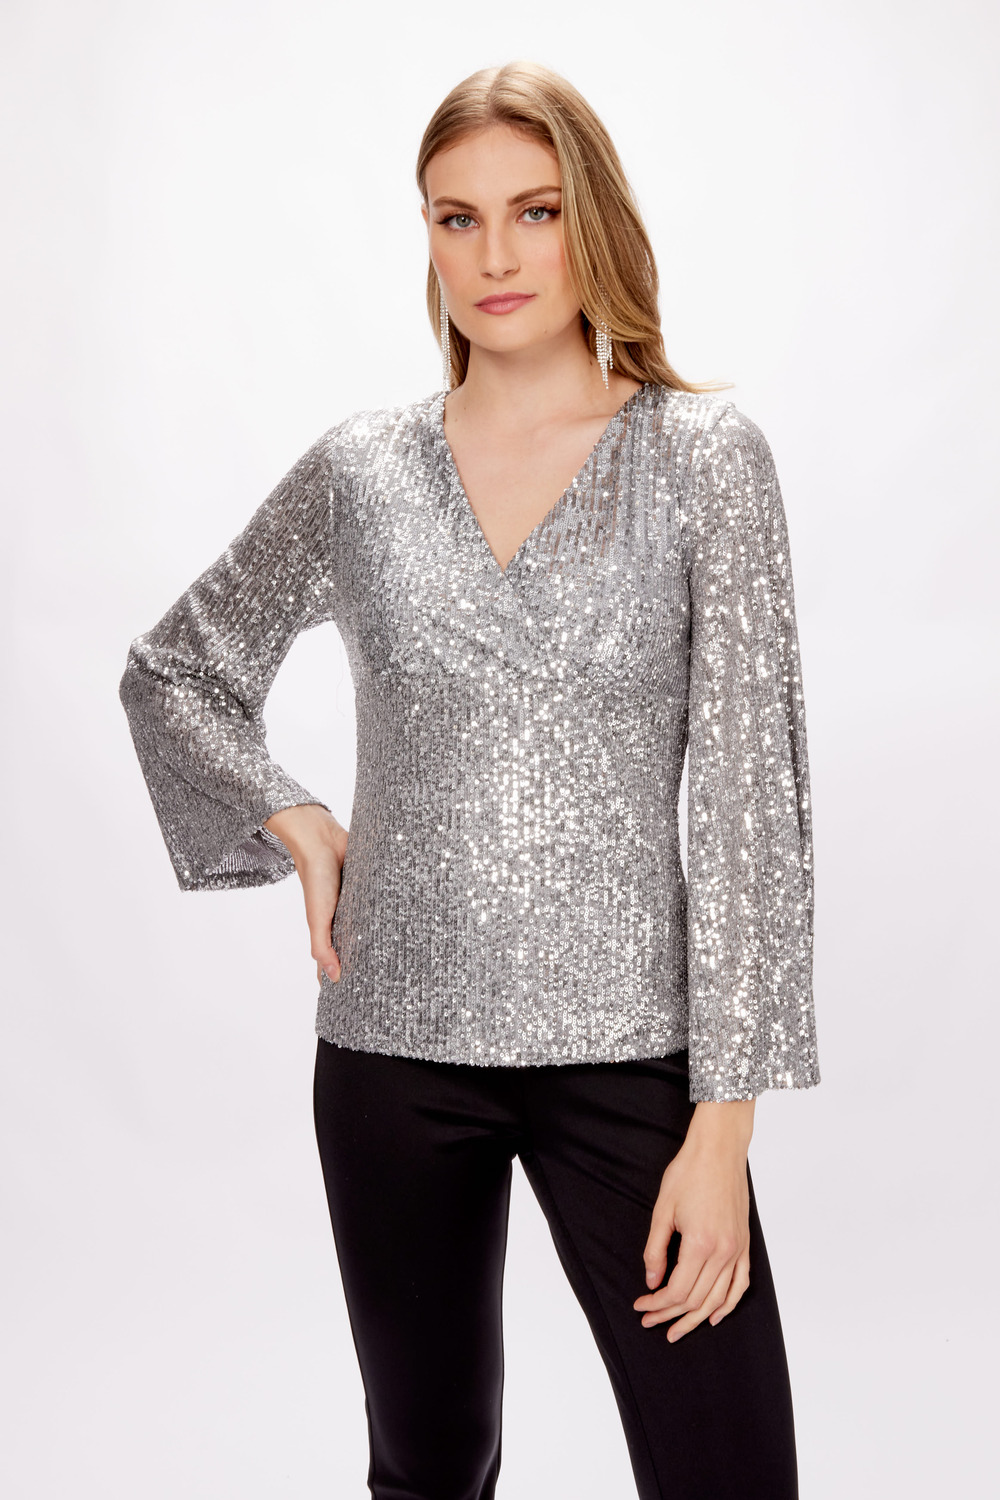 All-Over Sequin Top Style 234231. Silver Grey/silver